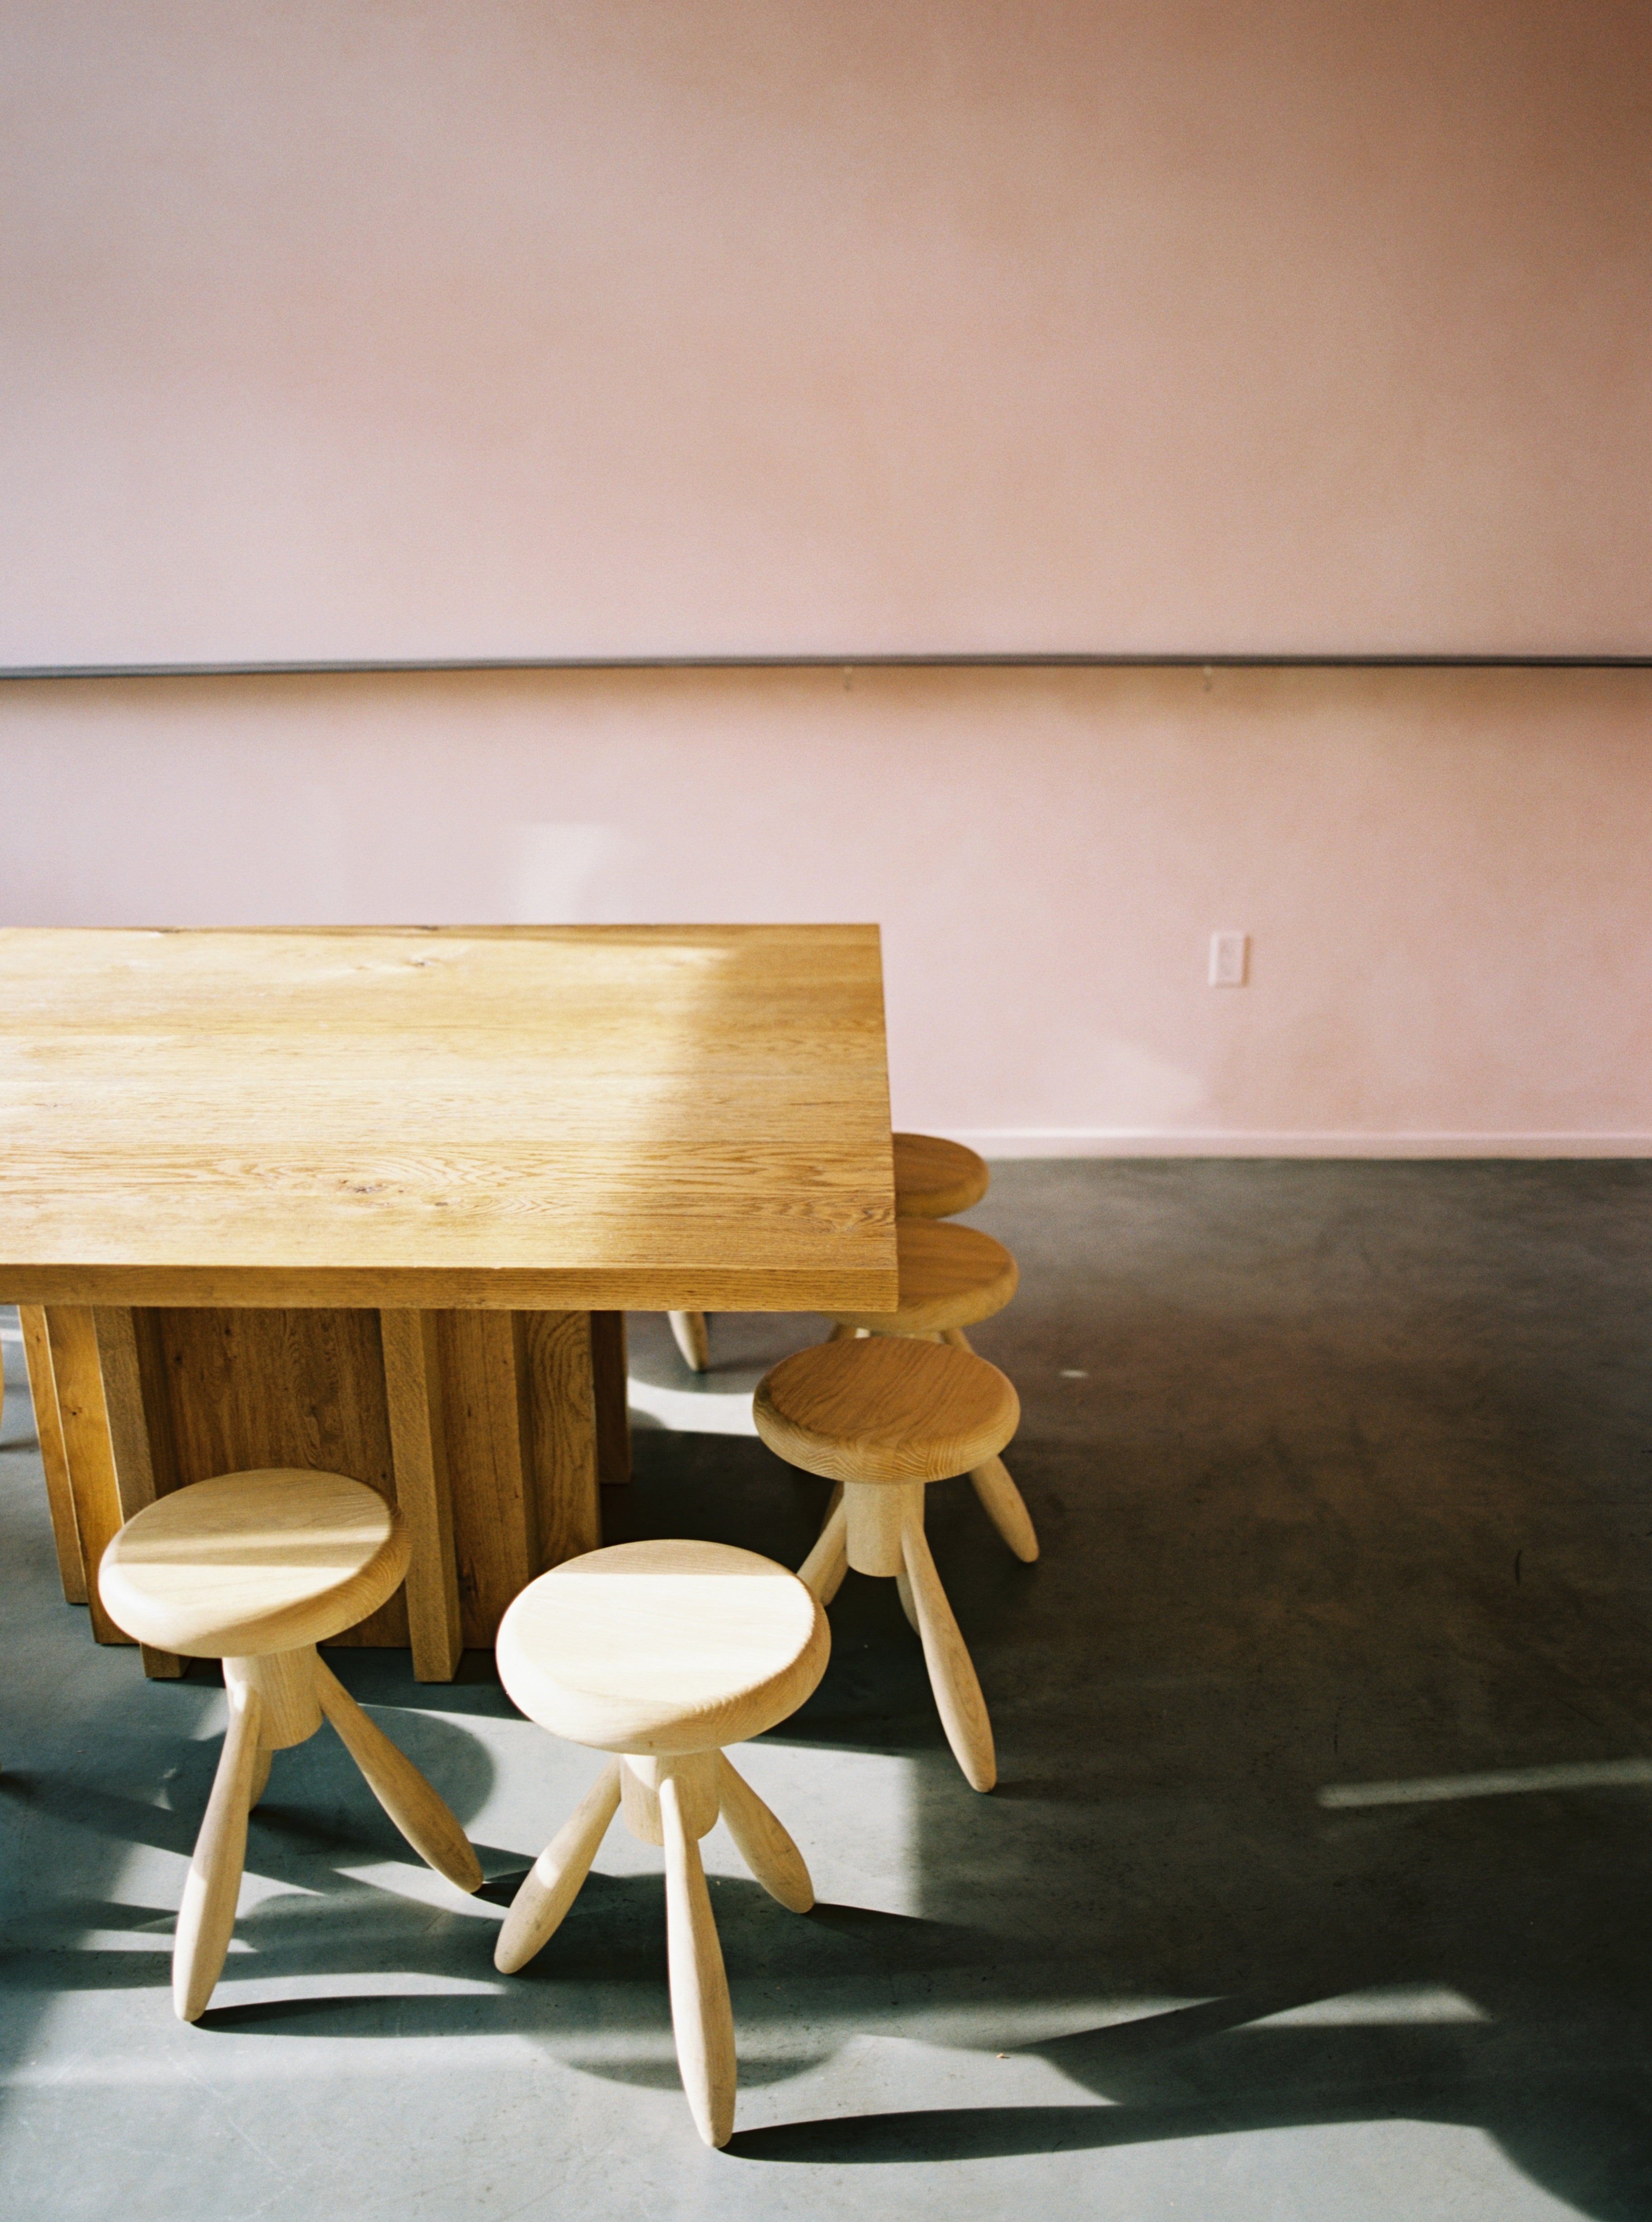 Communal table at Neighborhood Coffee in Los Angeles | Photo by Justin Chung